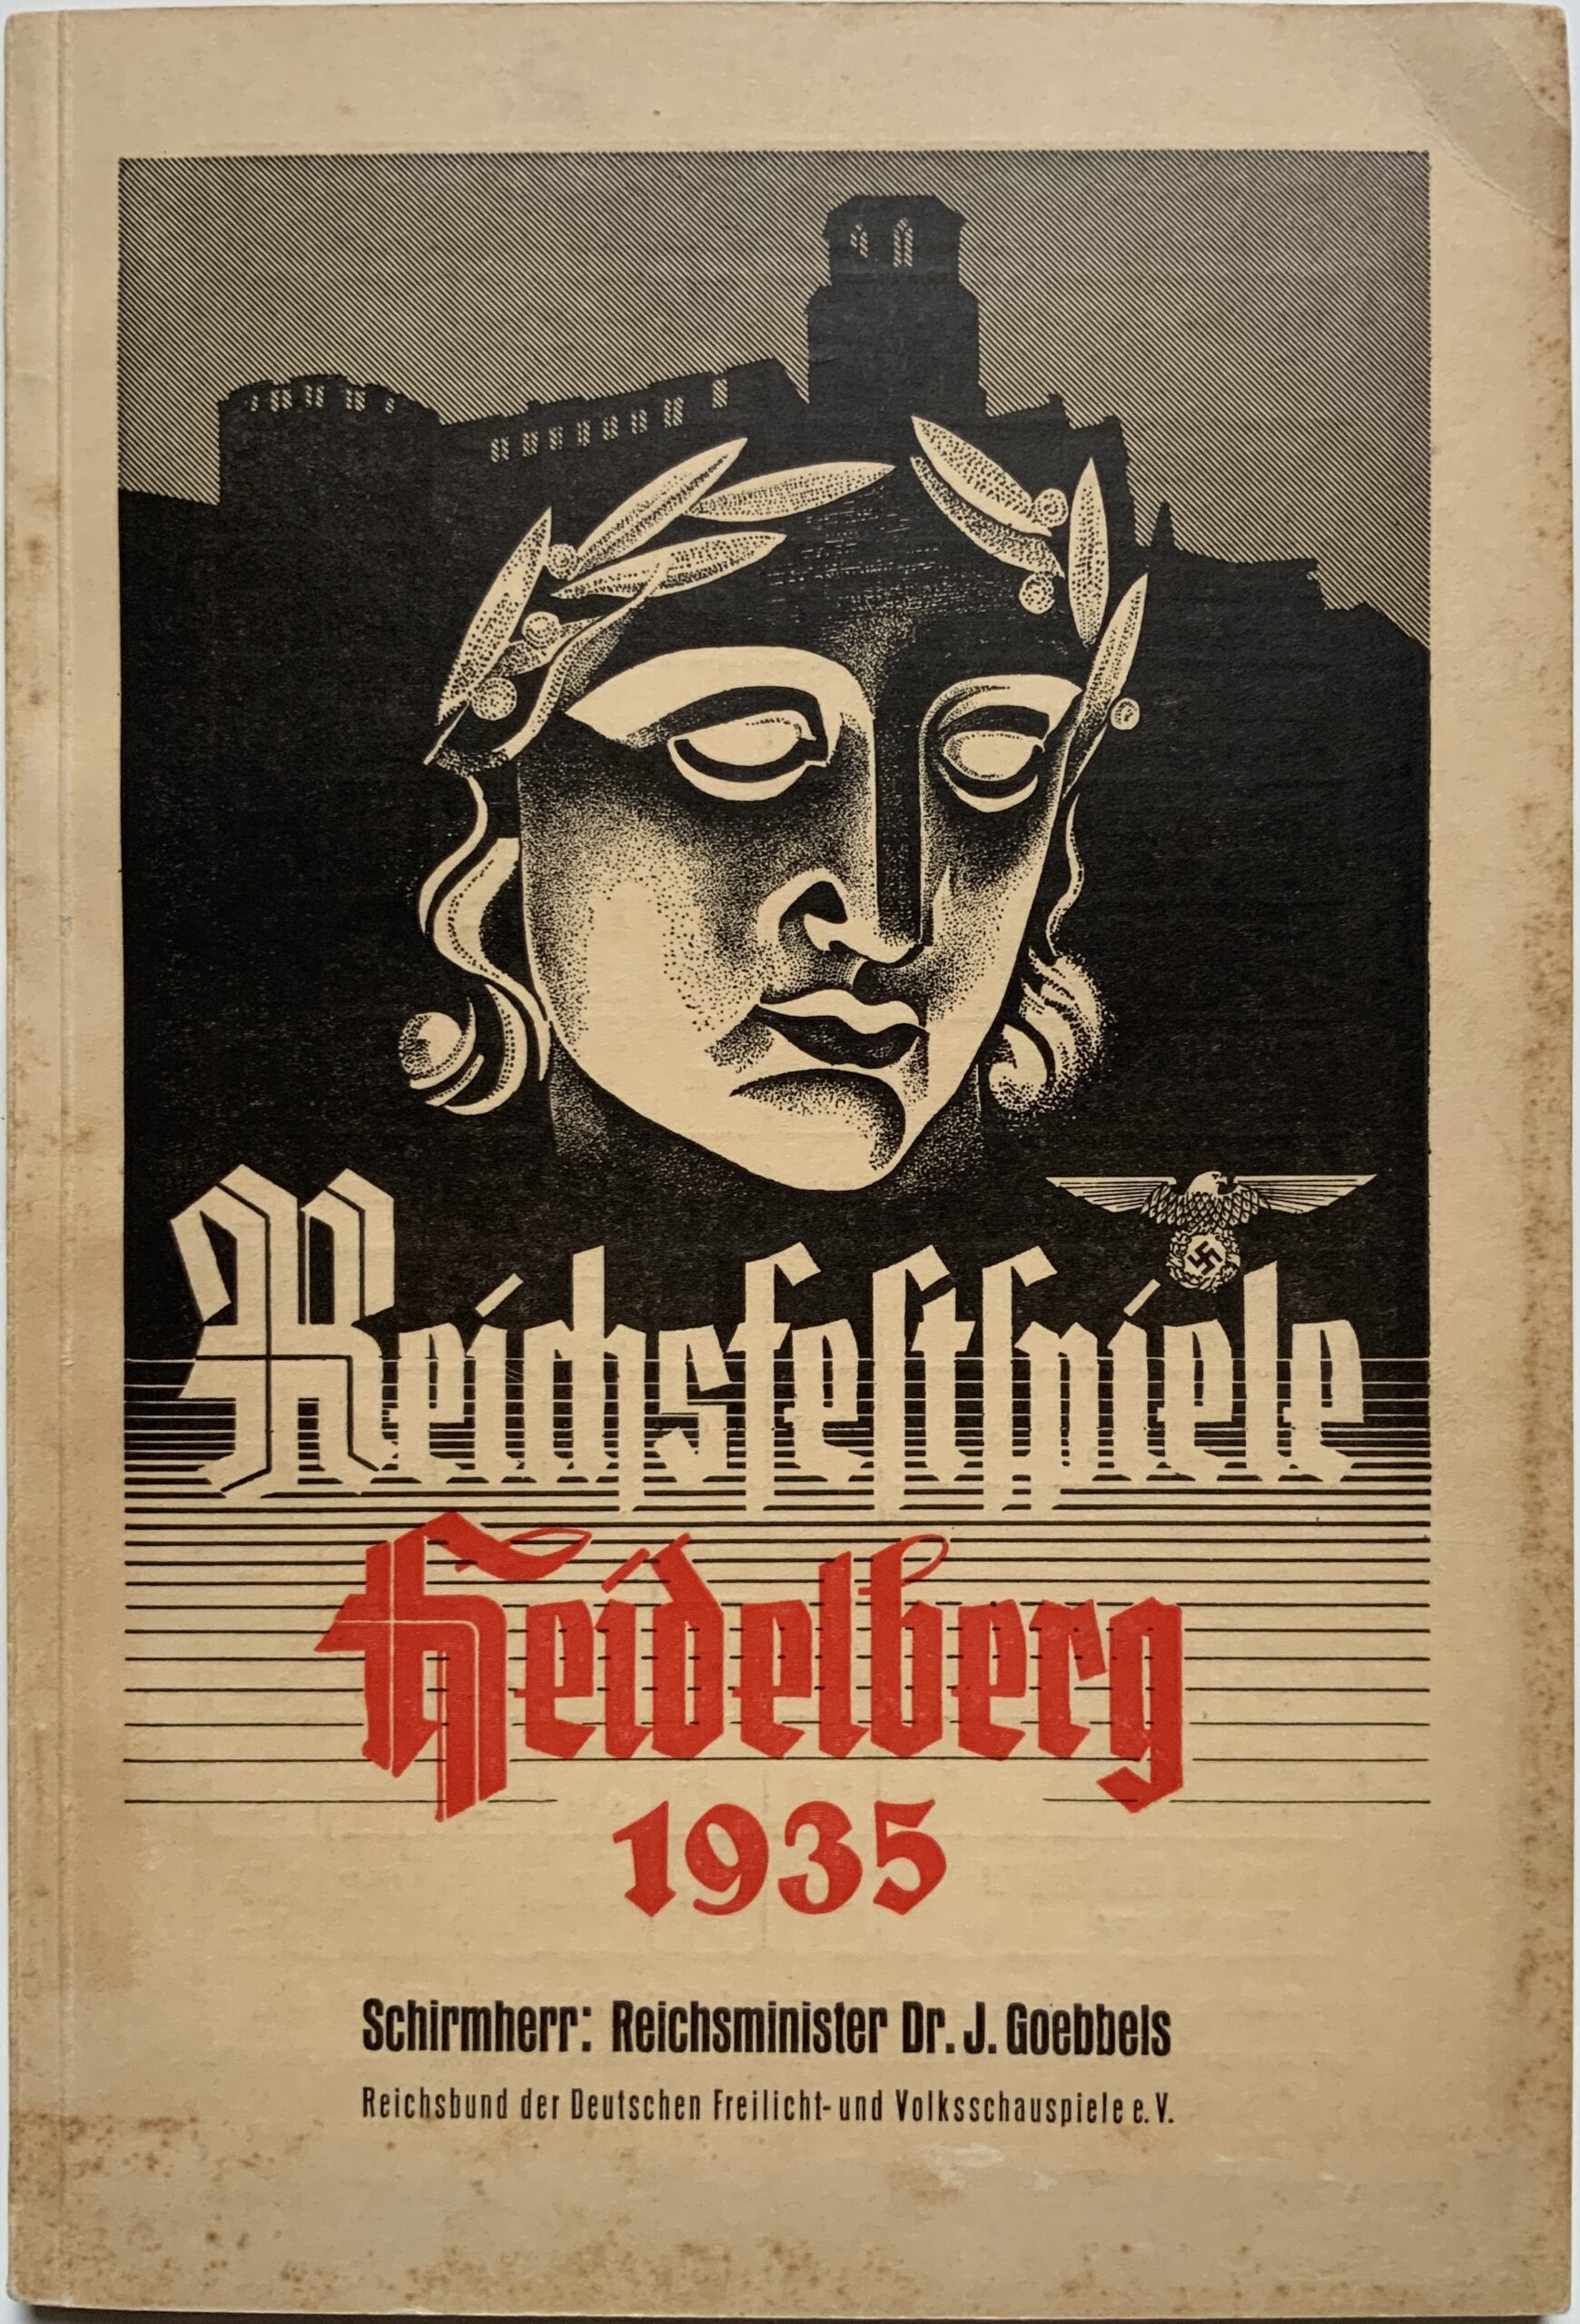 M126	NAZI MUSIC AND CULTURAL FESTIVAL CREATED RIGHT AFTER HITLER’S ELECTION - REICHSFESTSPIELE HEIDELBERG 1935